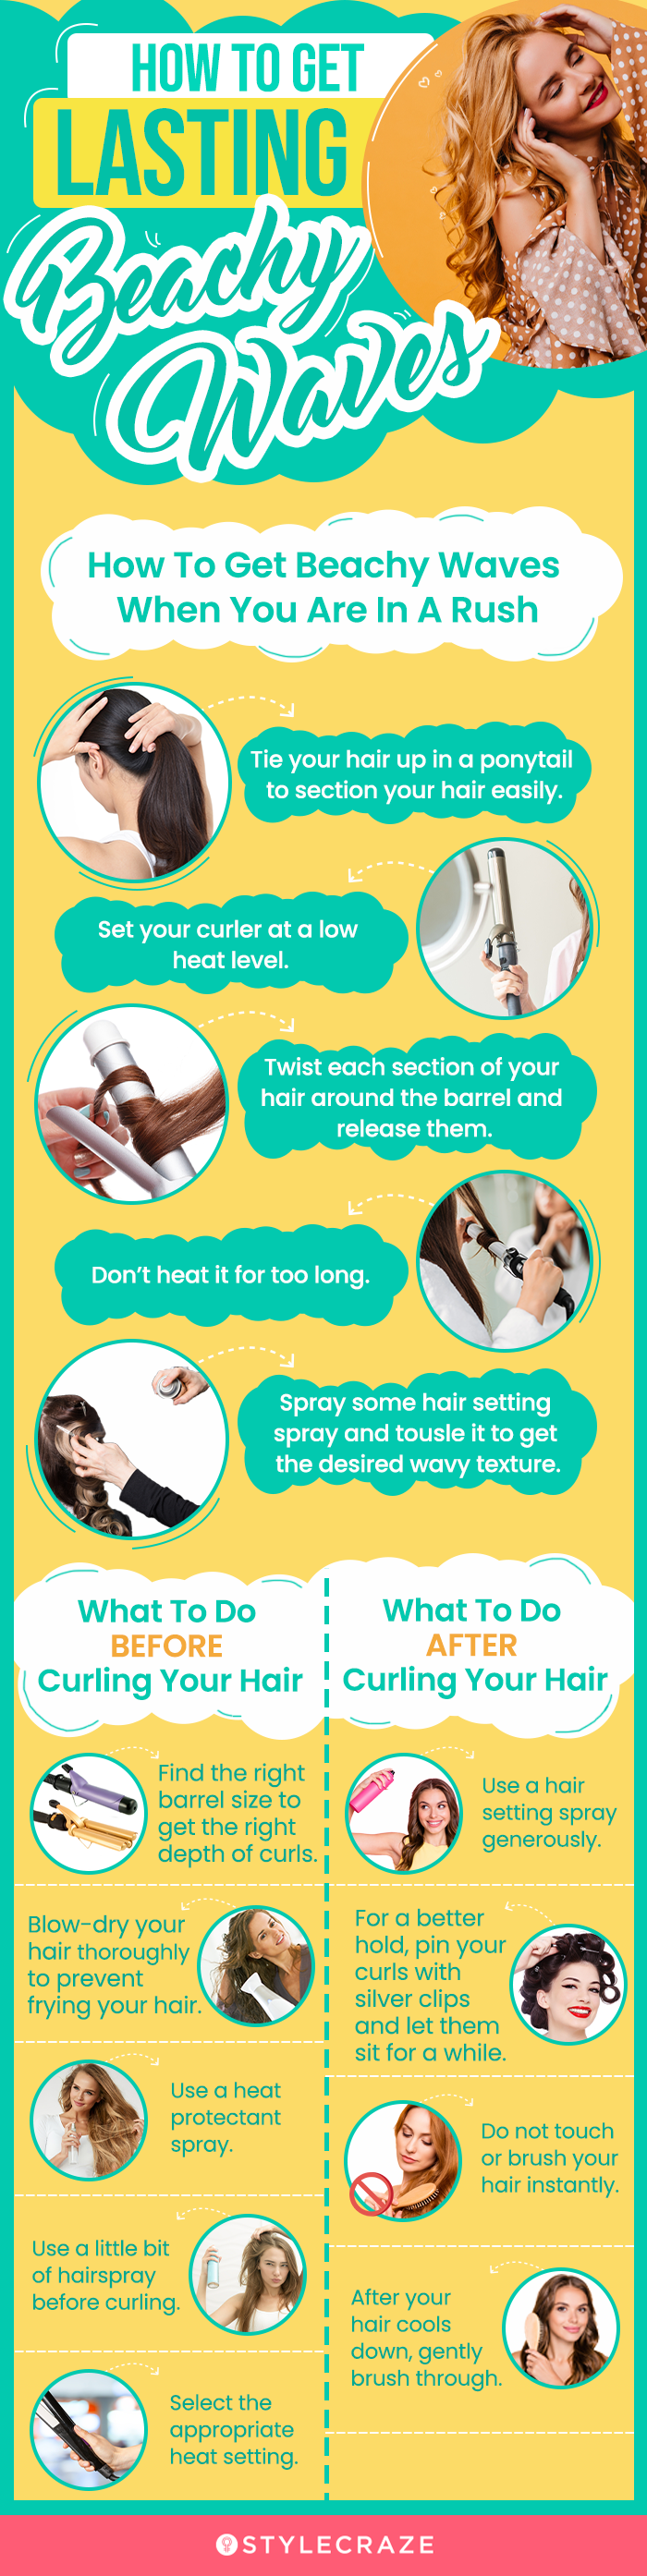 How To Get Lasting Beachy Wavy Hair  [infographic]